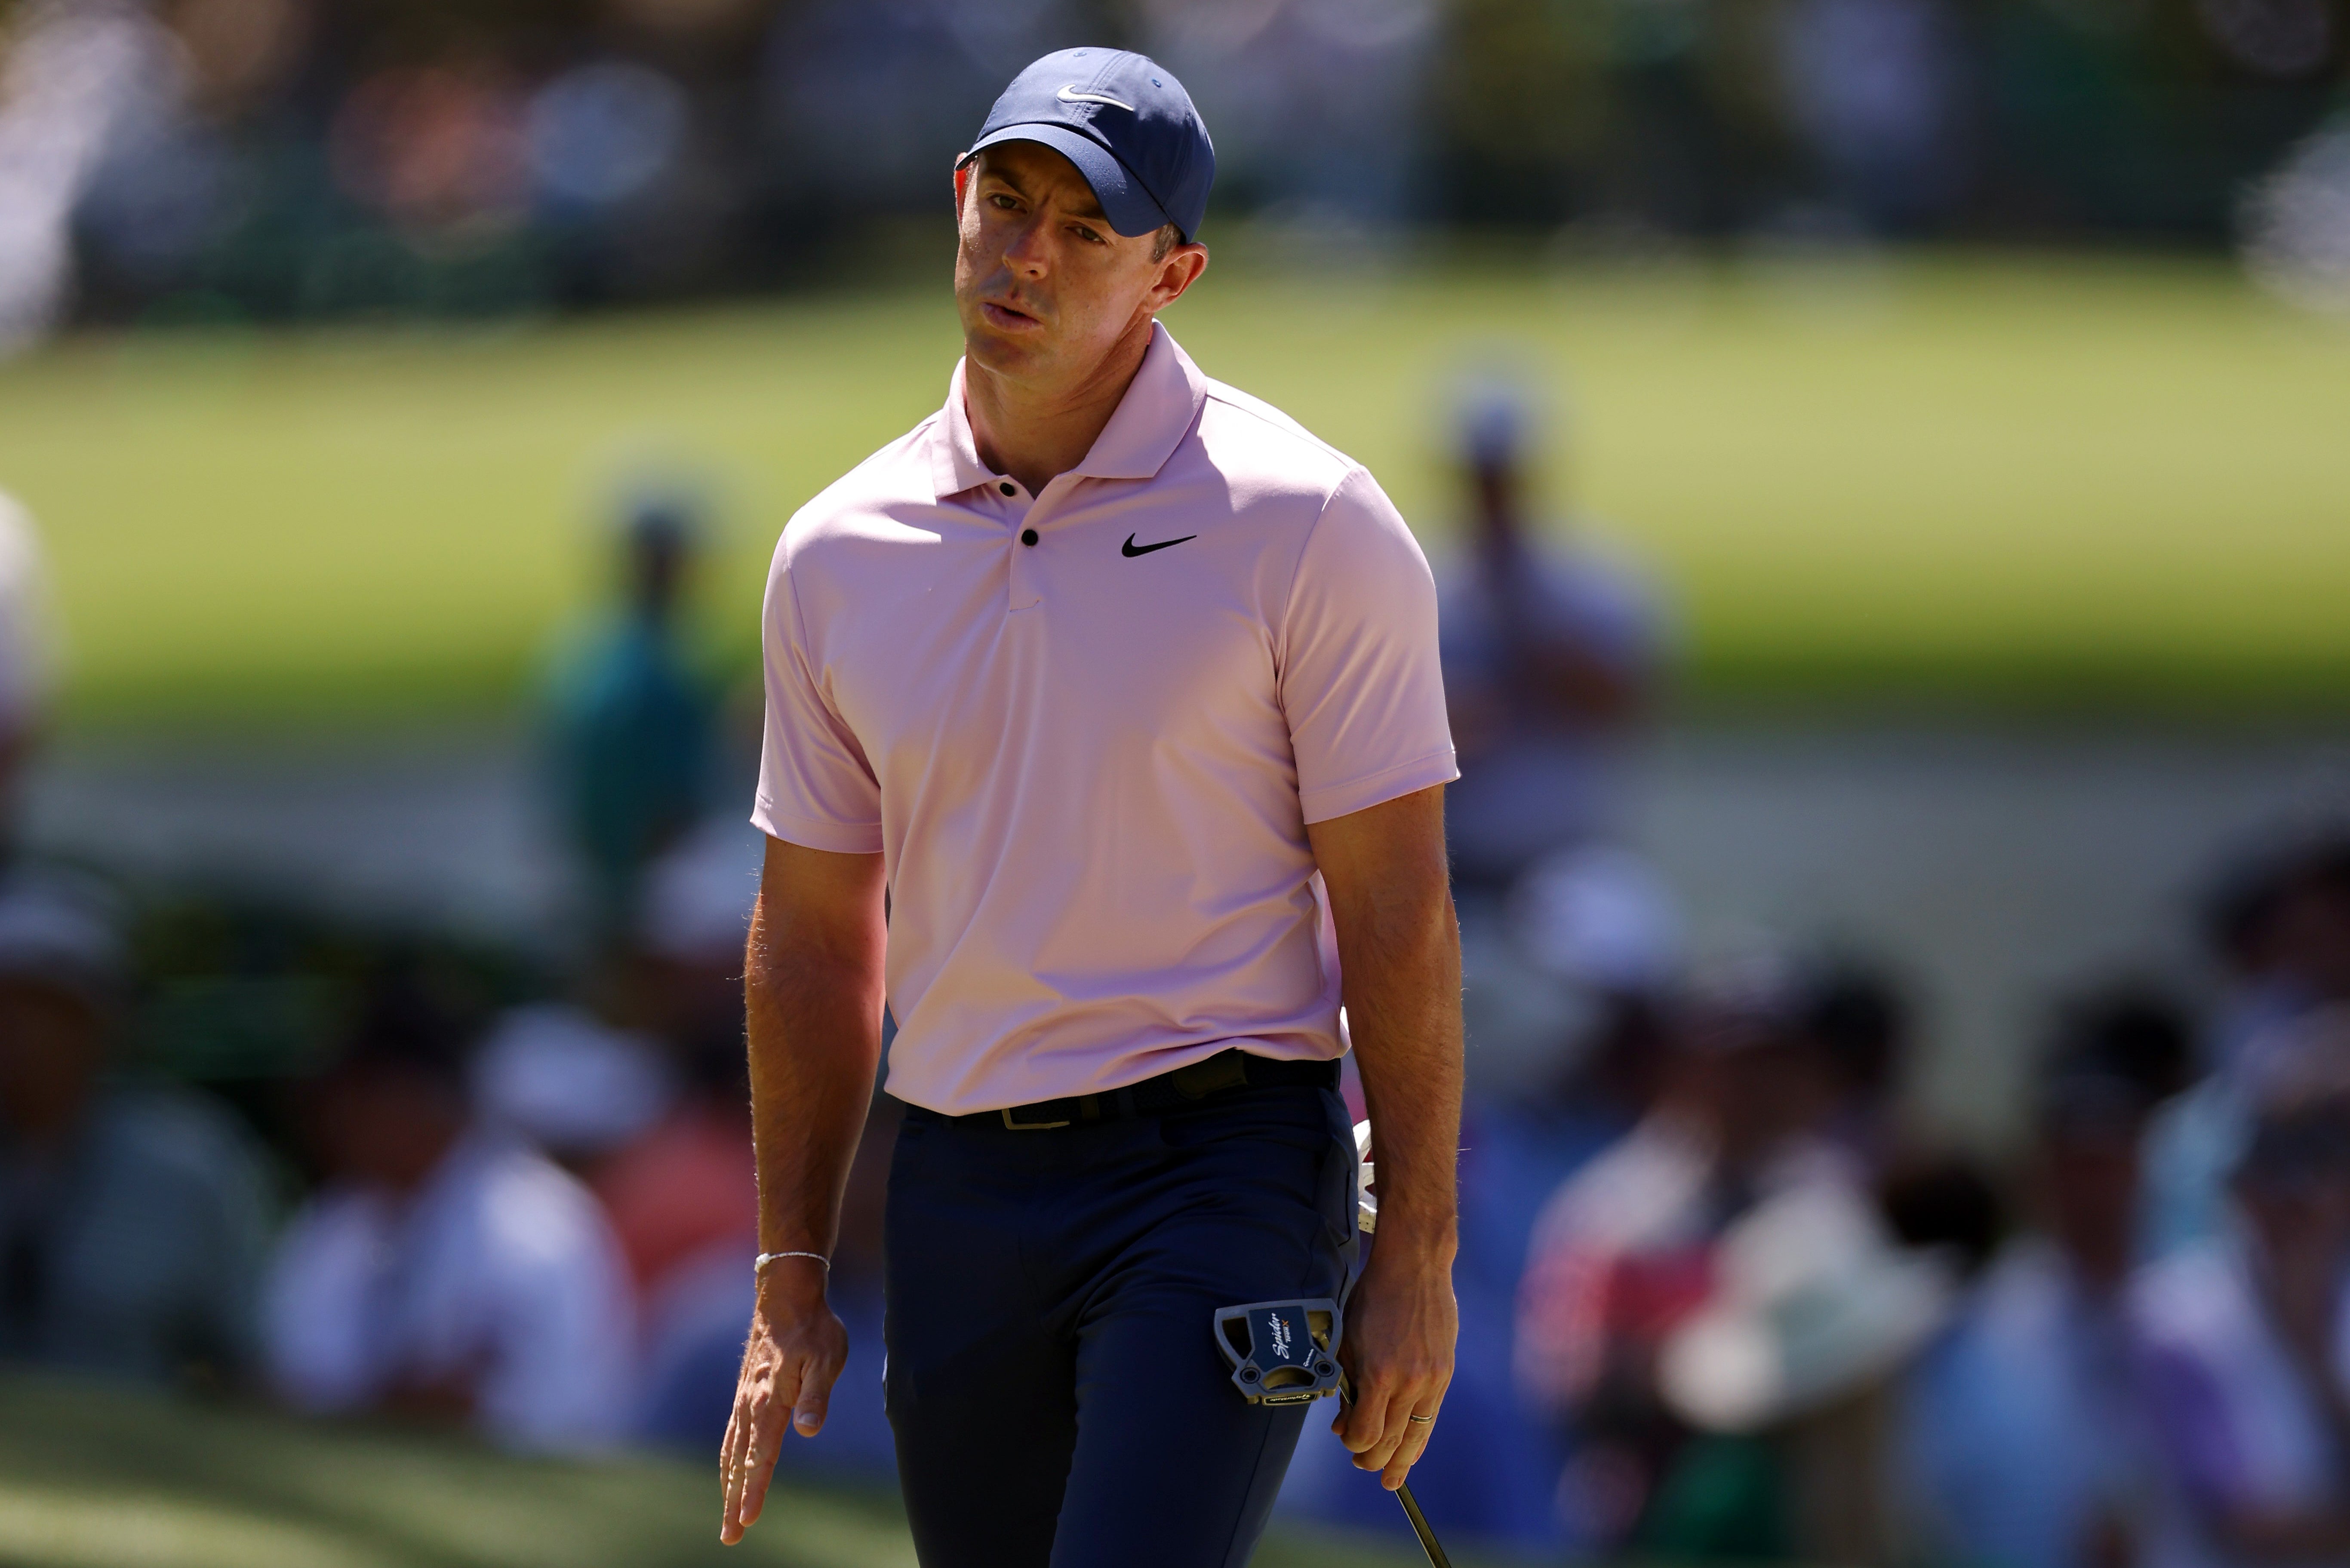 Rory McIlroy was unable to play his way into contention on Saturday